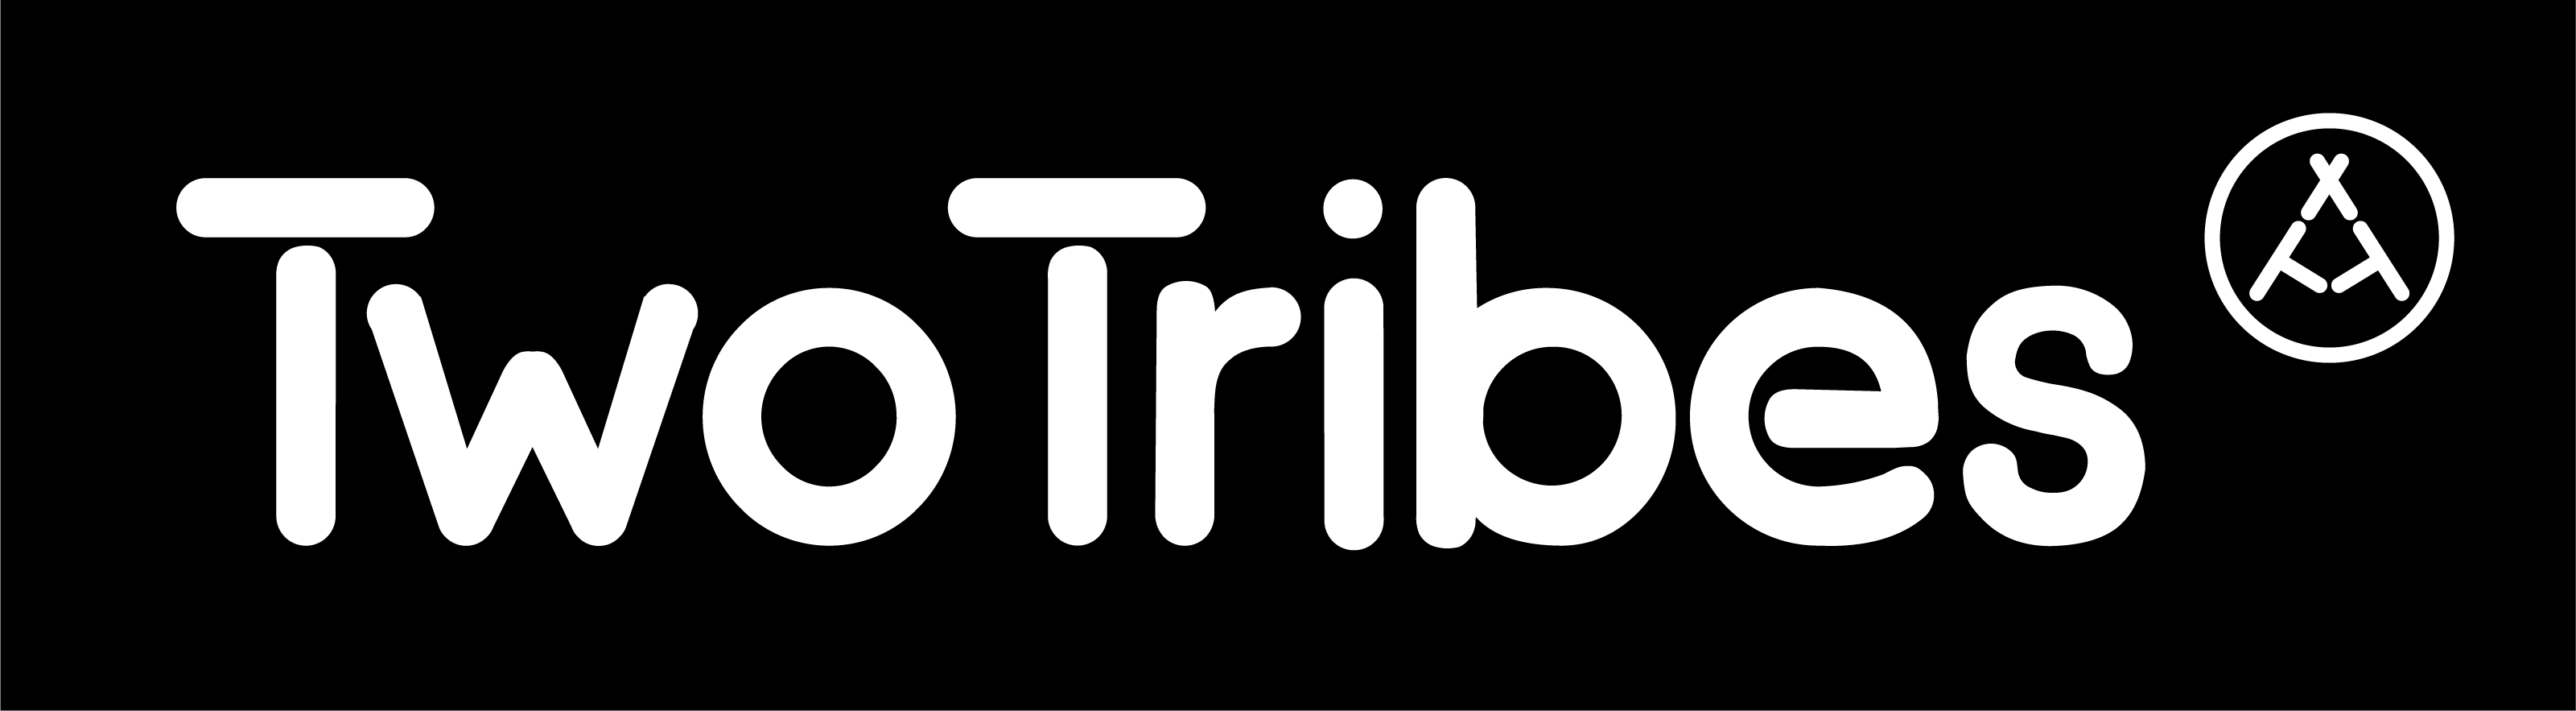 logo for Two Tribes